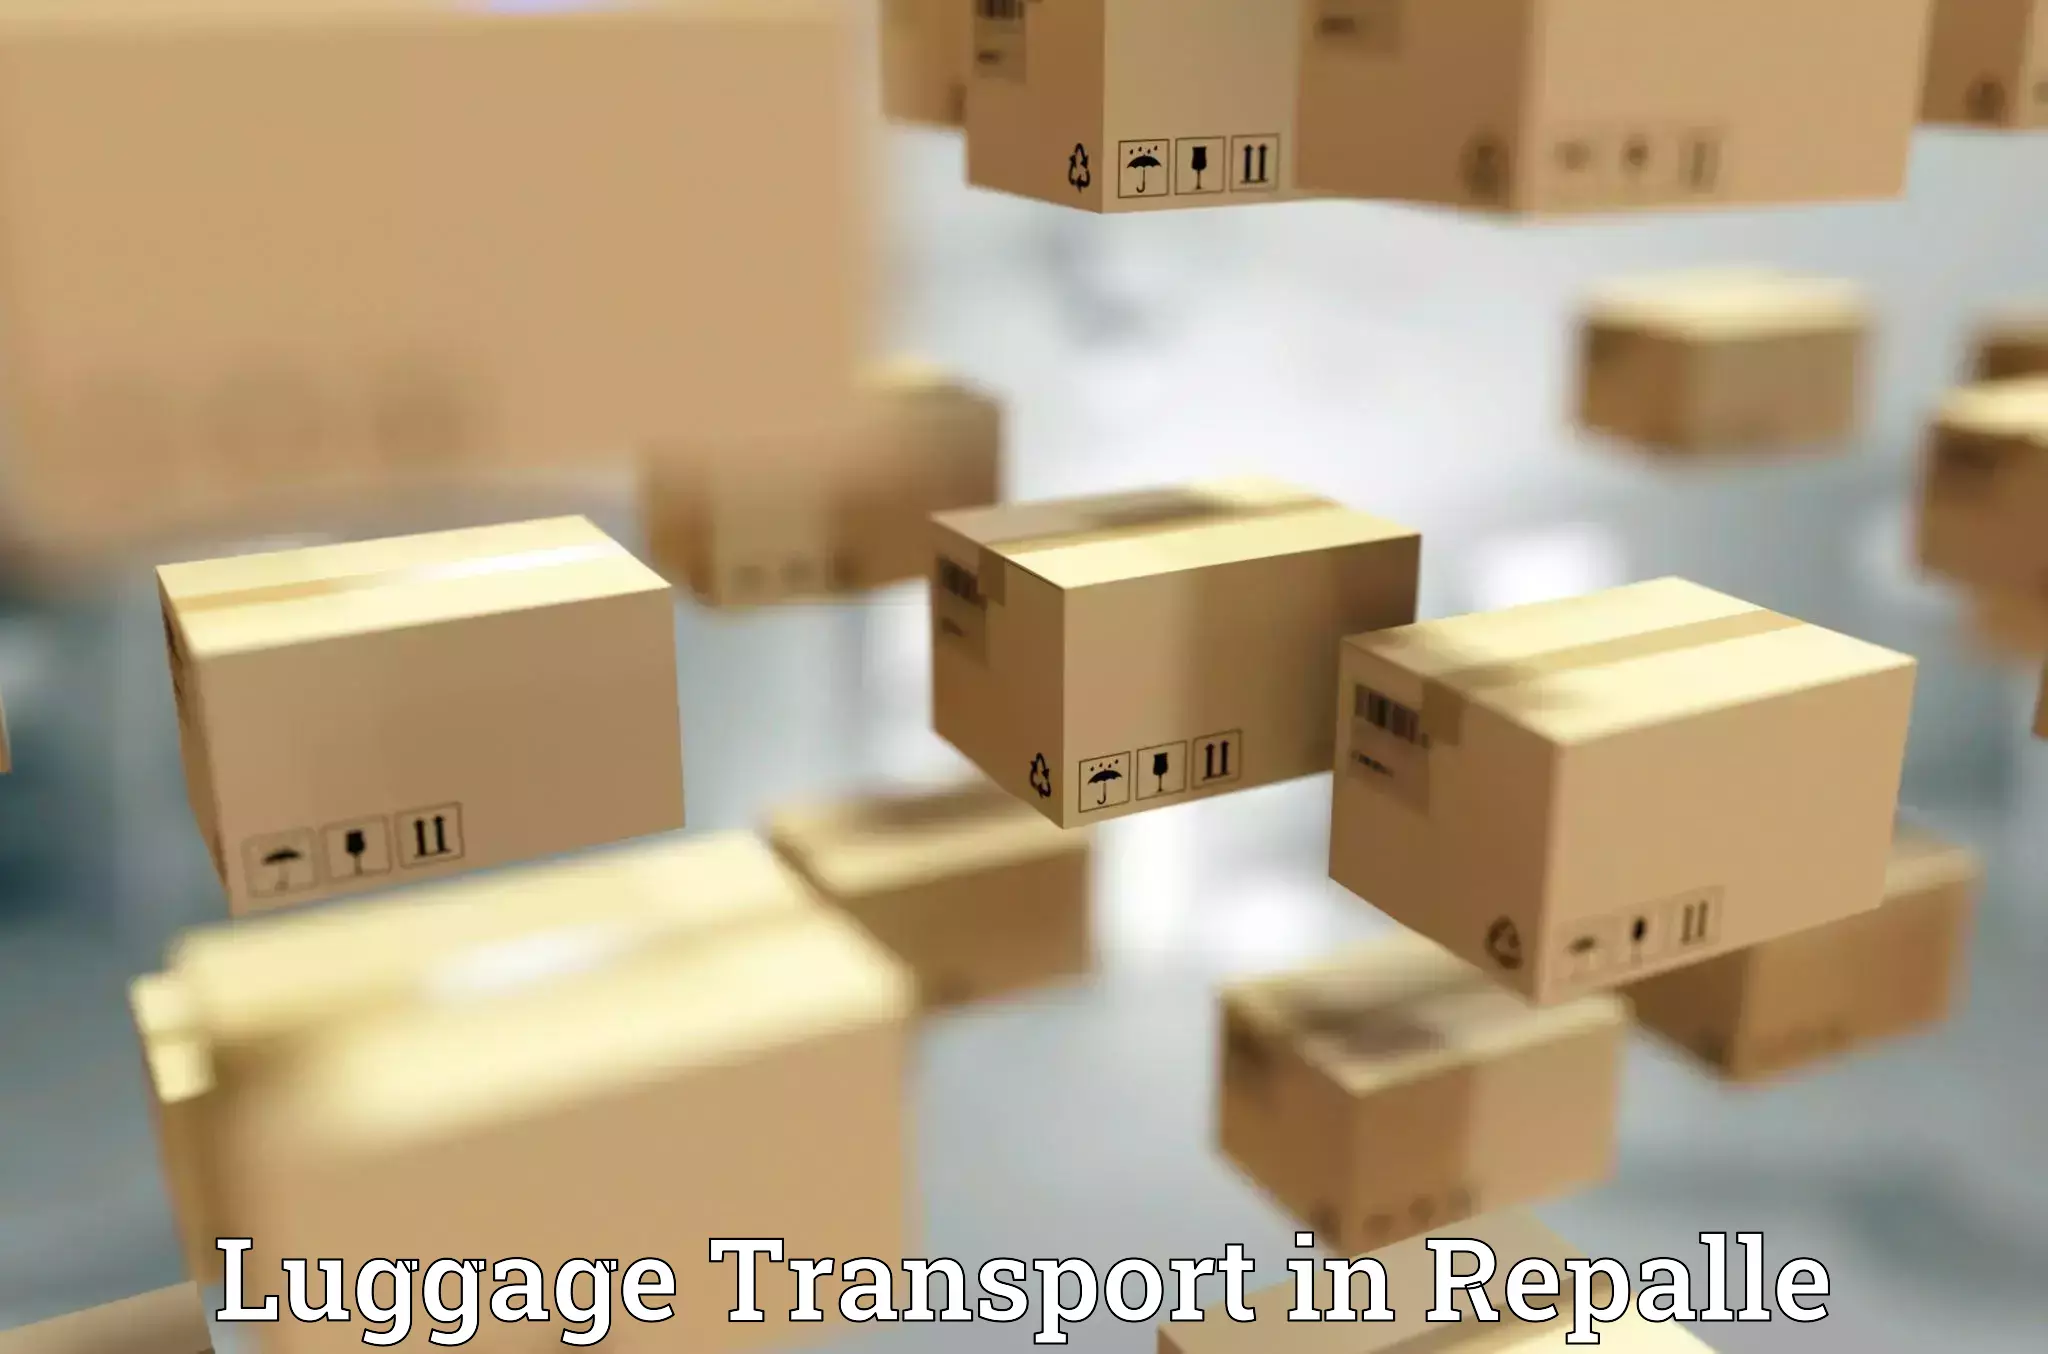 Tailored baggage transport in Repalle